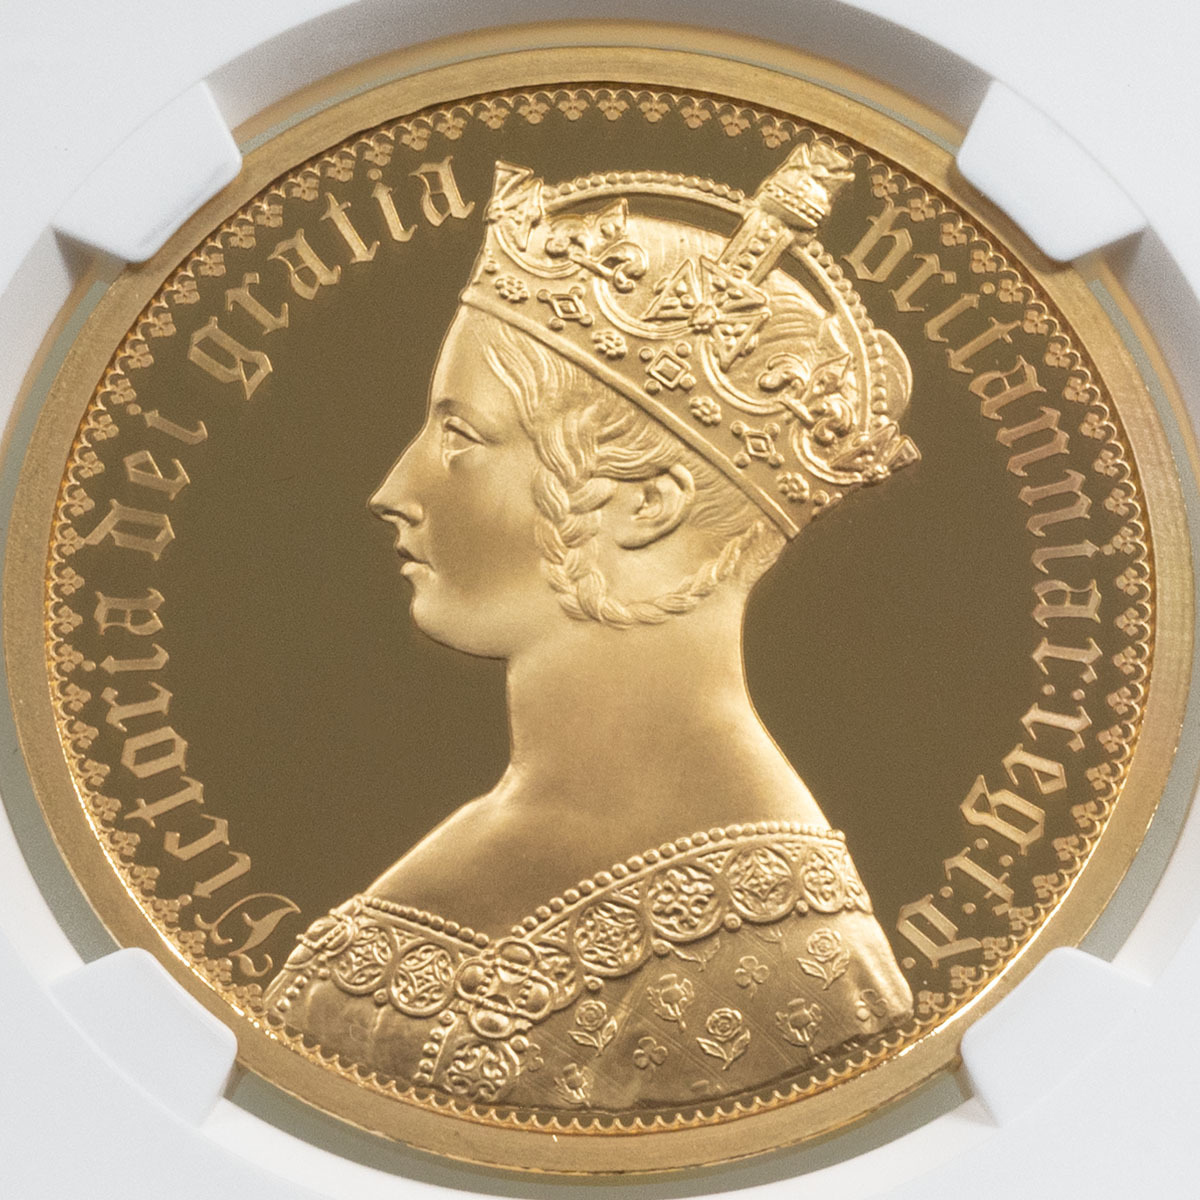 UK21GOG2 2021 Great Engraver's Gothic Crown Portrait Two Ounce Gold Proof Plain Edge Coin NGC Graded PF 70 Ultra Cameo First Releases Reverse